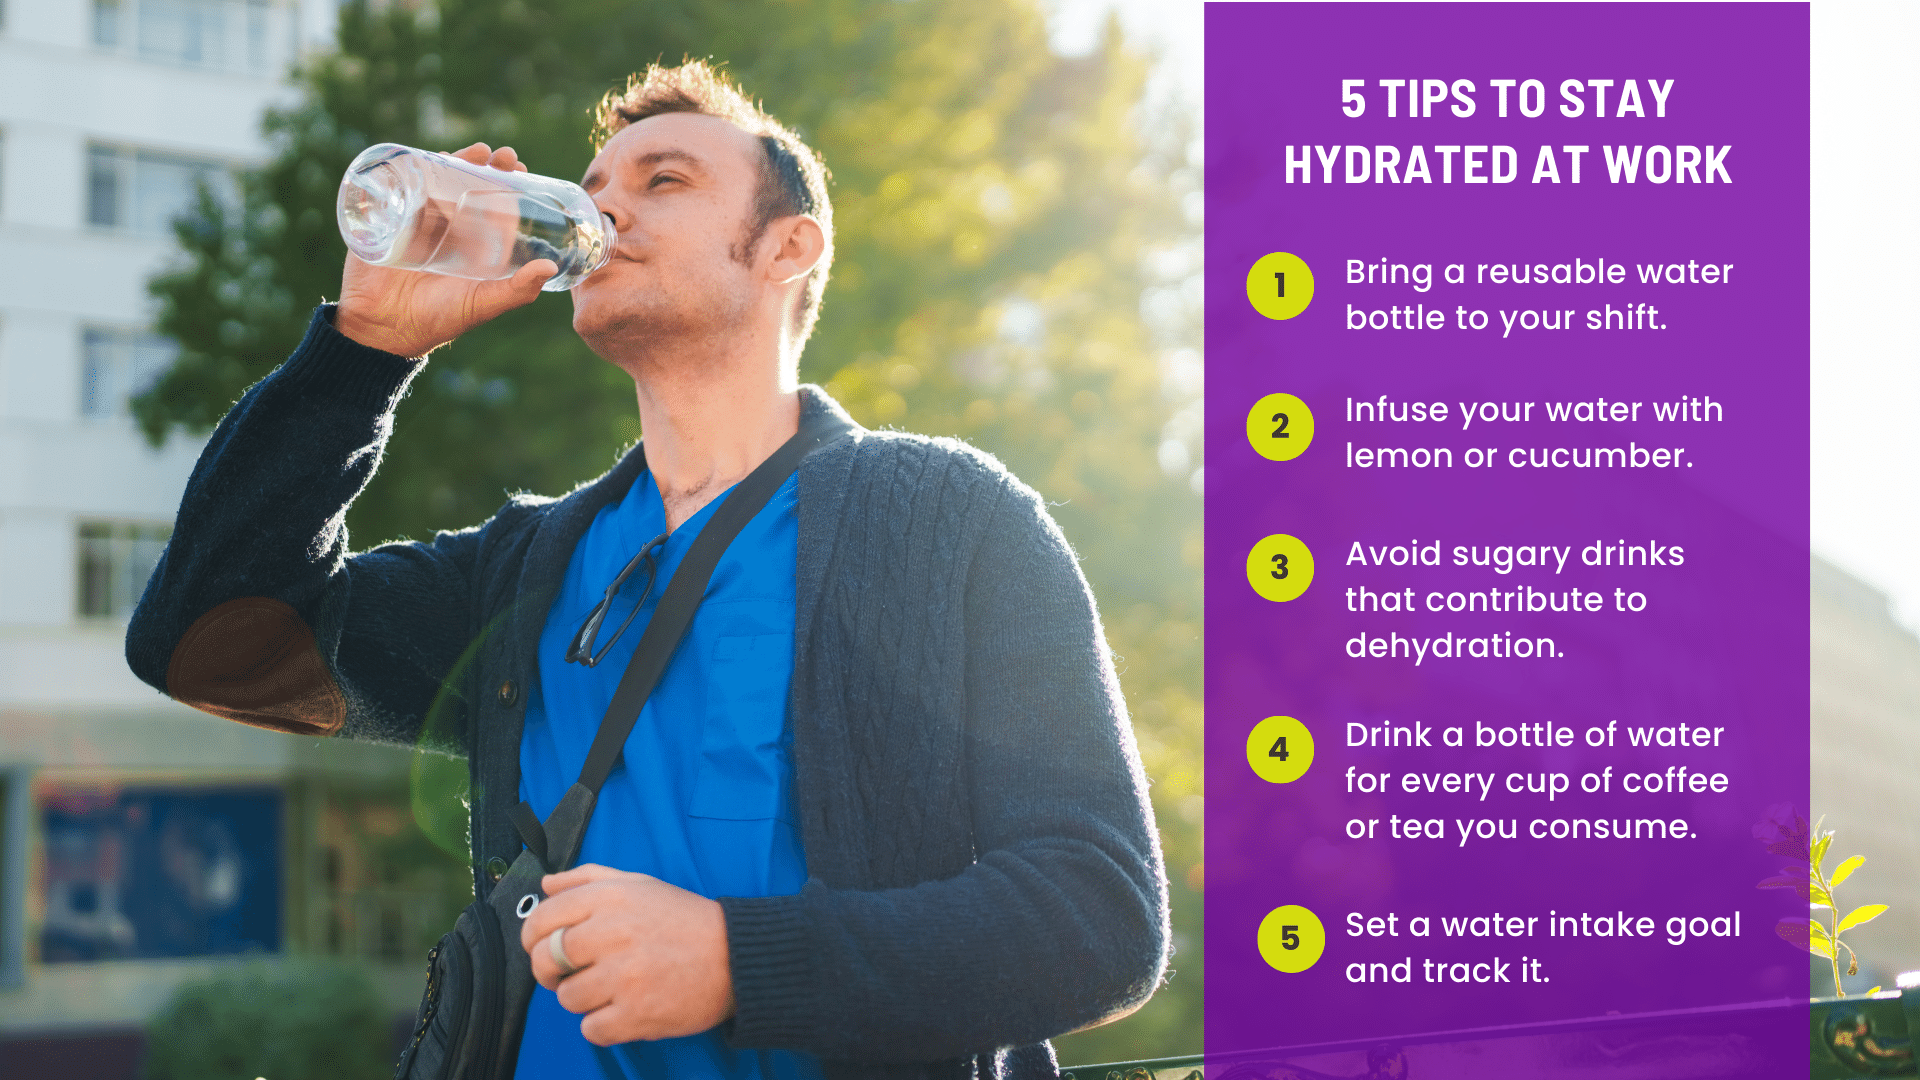 An image of a nurse drinking water while taking a break outdoors, with text that lists five tips for nurses to stay hydrated at work.